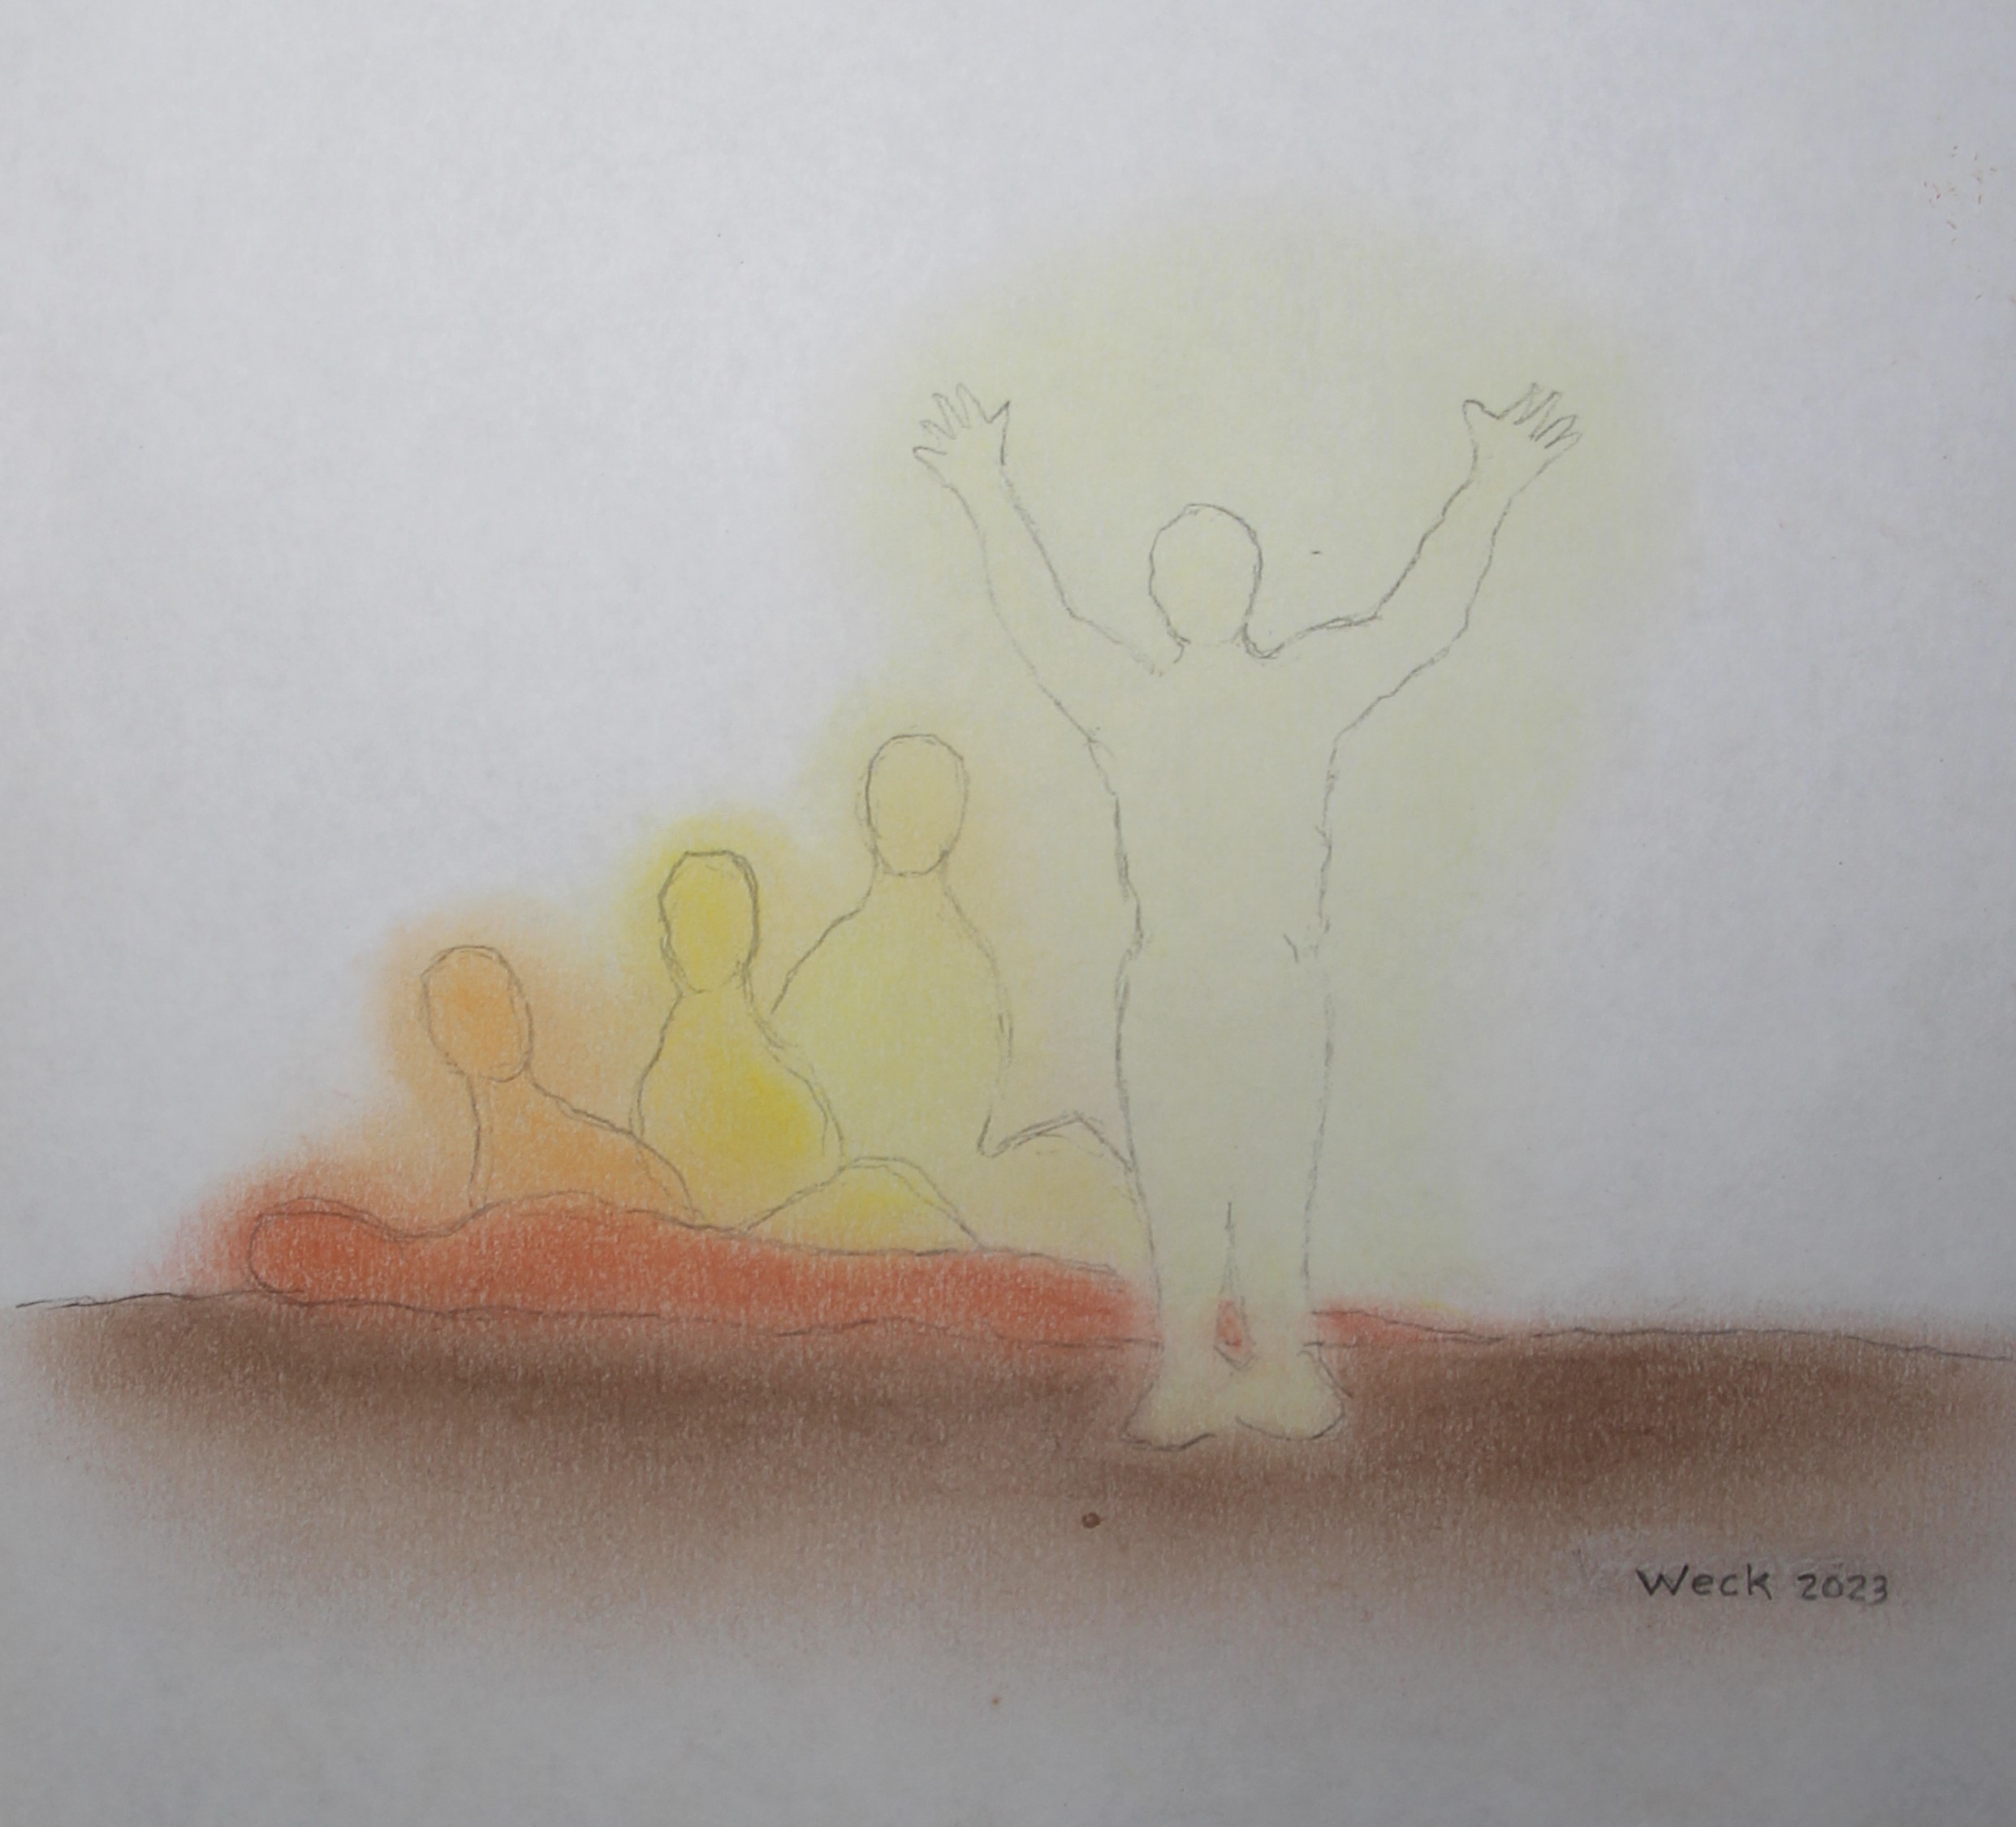 A pencil sketch of four human figures. One figure stands with arms raised, while the other three are seated or lying down. The figures are highlighted in various shades of yellow and orange. The background is white with a blend of brown and red at the base, resembling a trinity scene. The text "Week 2023" is in the bottom right corner.